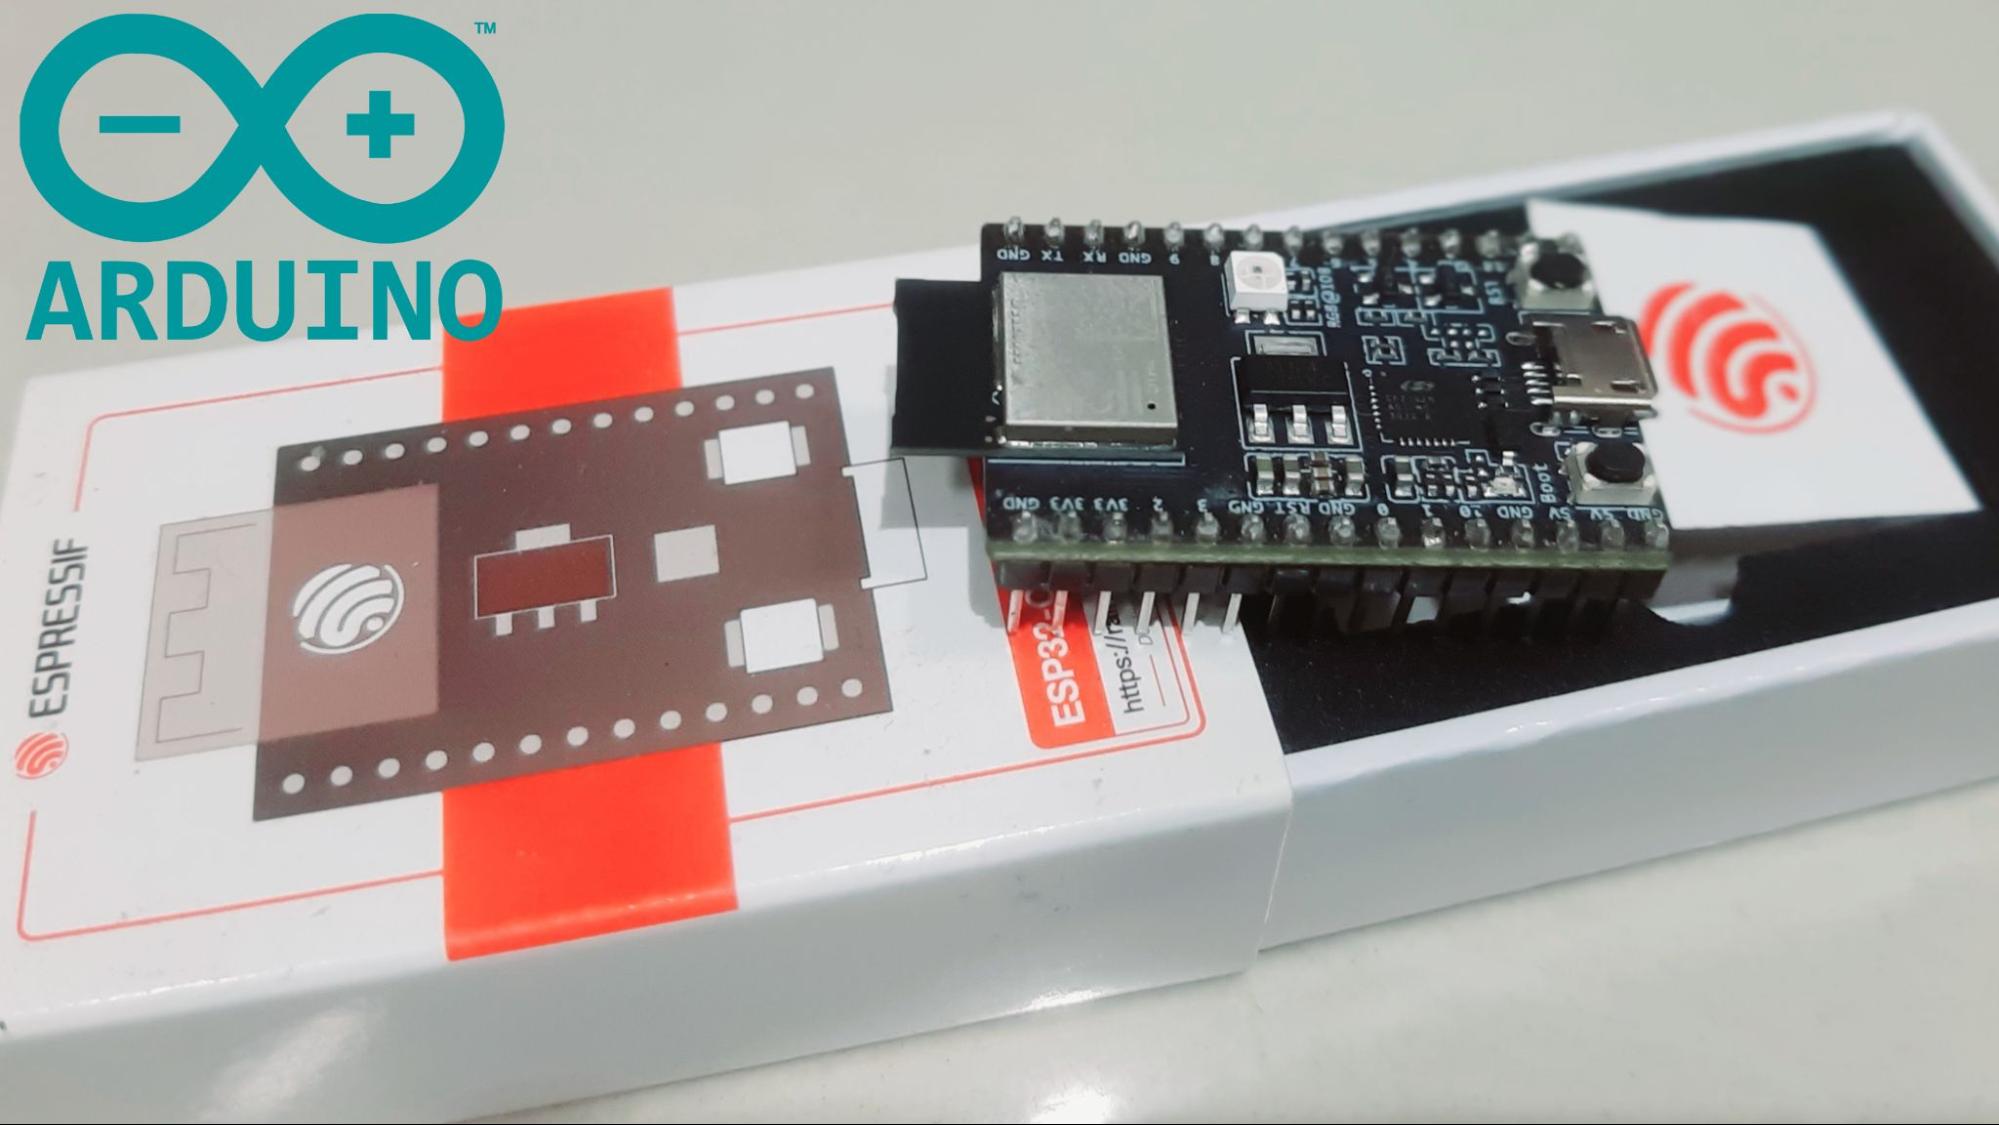 Getting Started With The Esp32 Using The Arduino Ide | CLOUD HOT GIRL